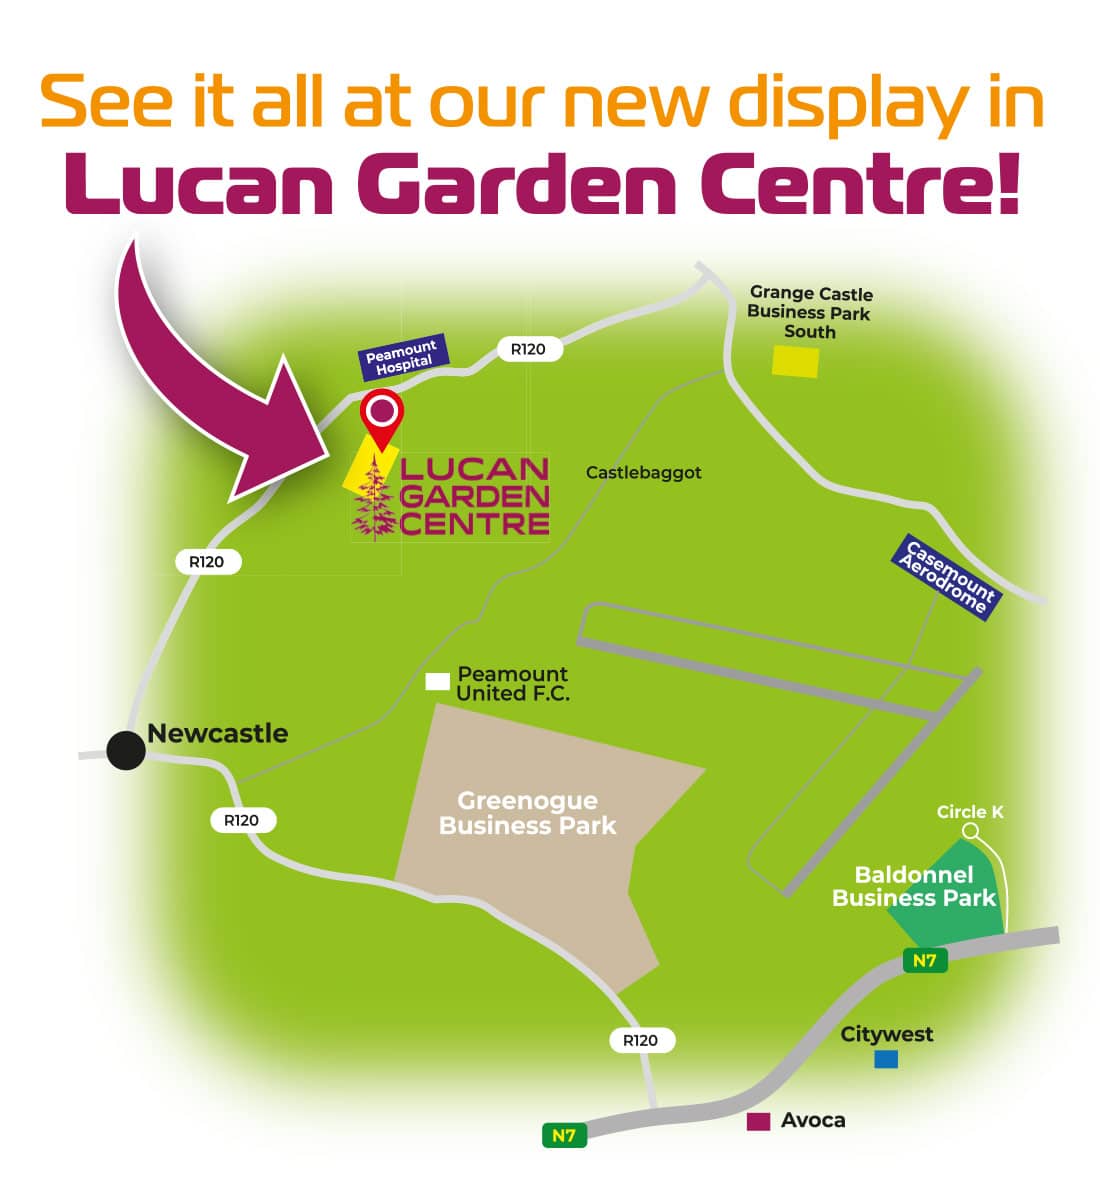 Clickable image of map to display centre in Lucan Garden Centre - open in Google Maps